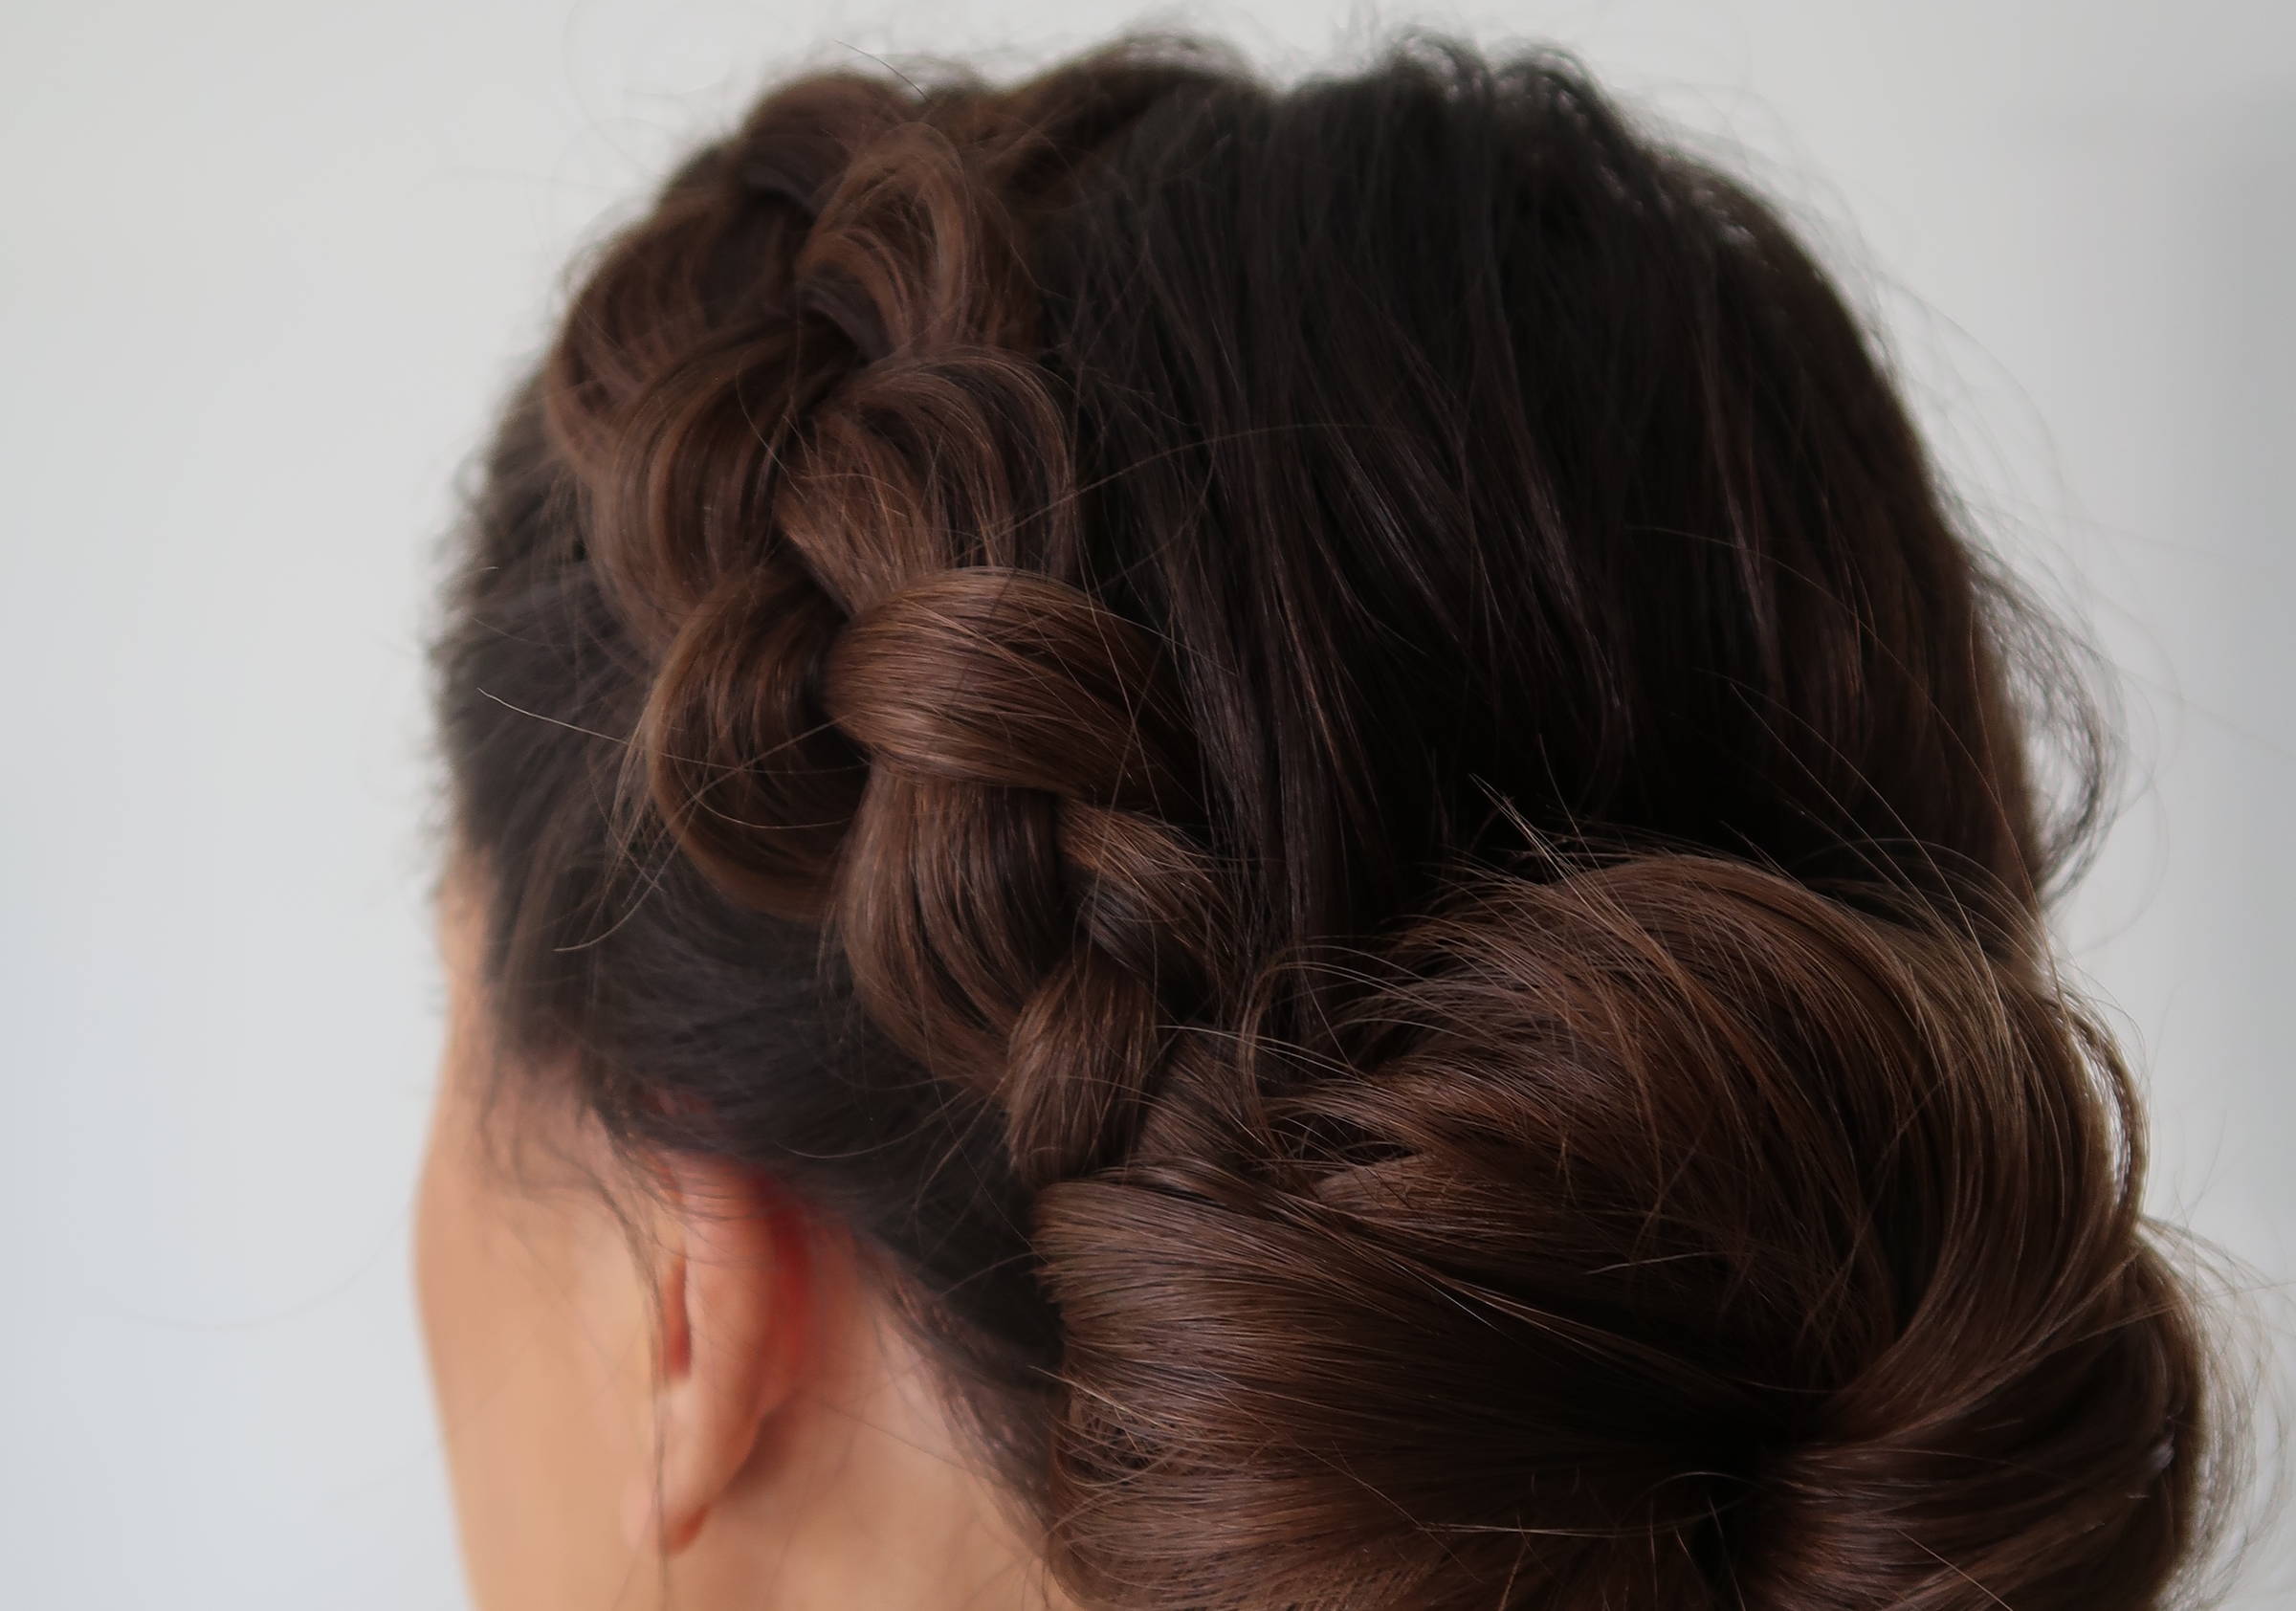 photo of backview of a blonde woman's hair in a low bun hairstyle